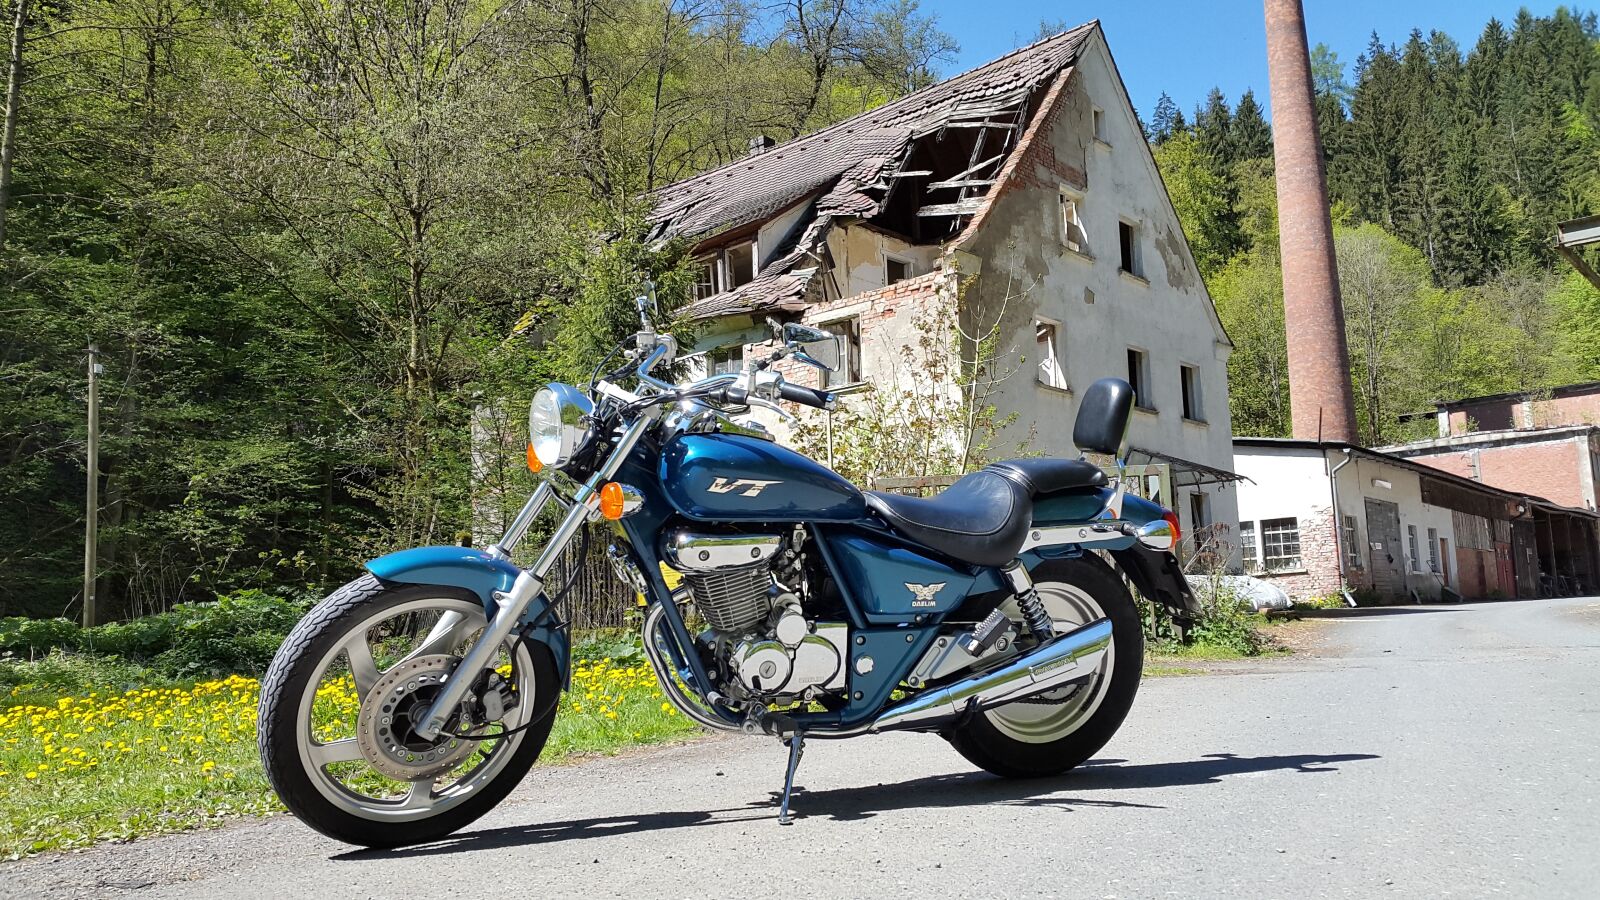 Samsung Galaxy Alpha sample photo. Motorcycle, lost place, drive photography